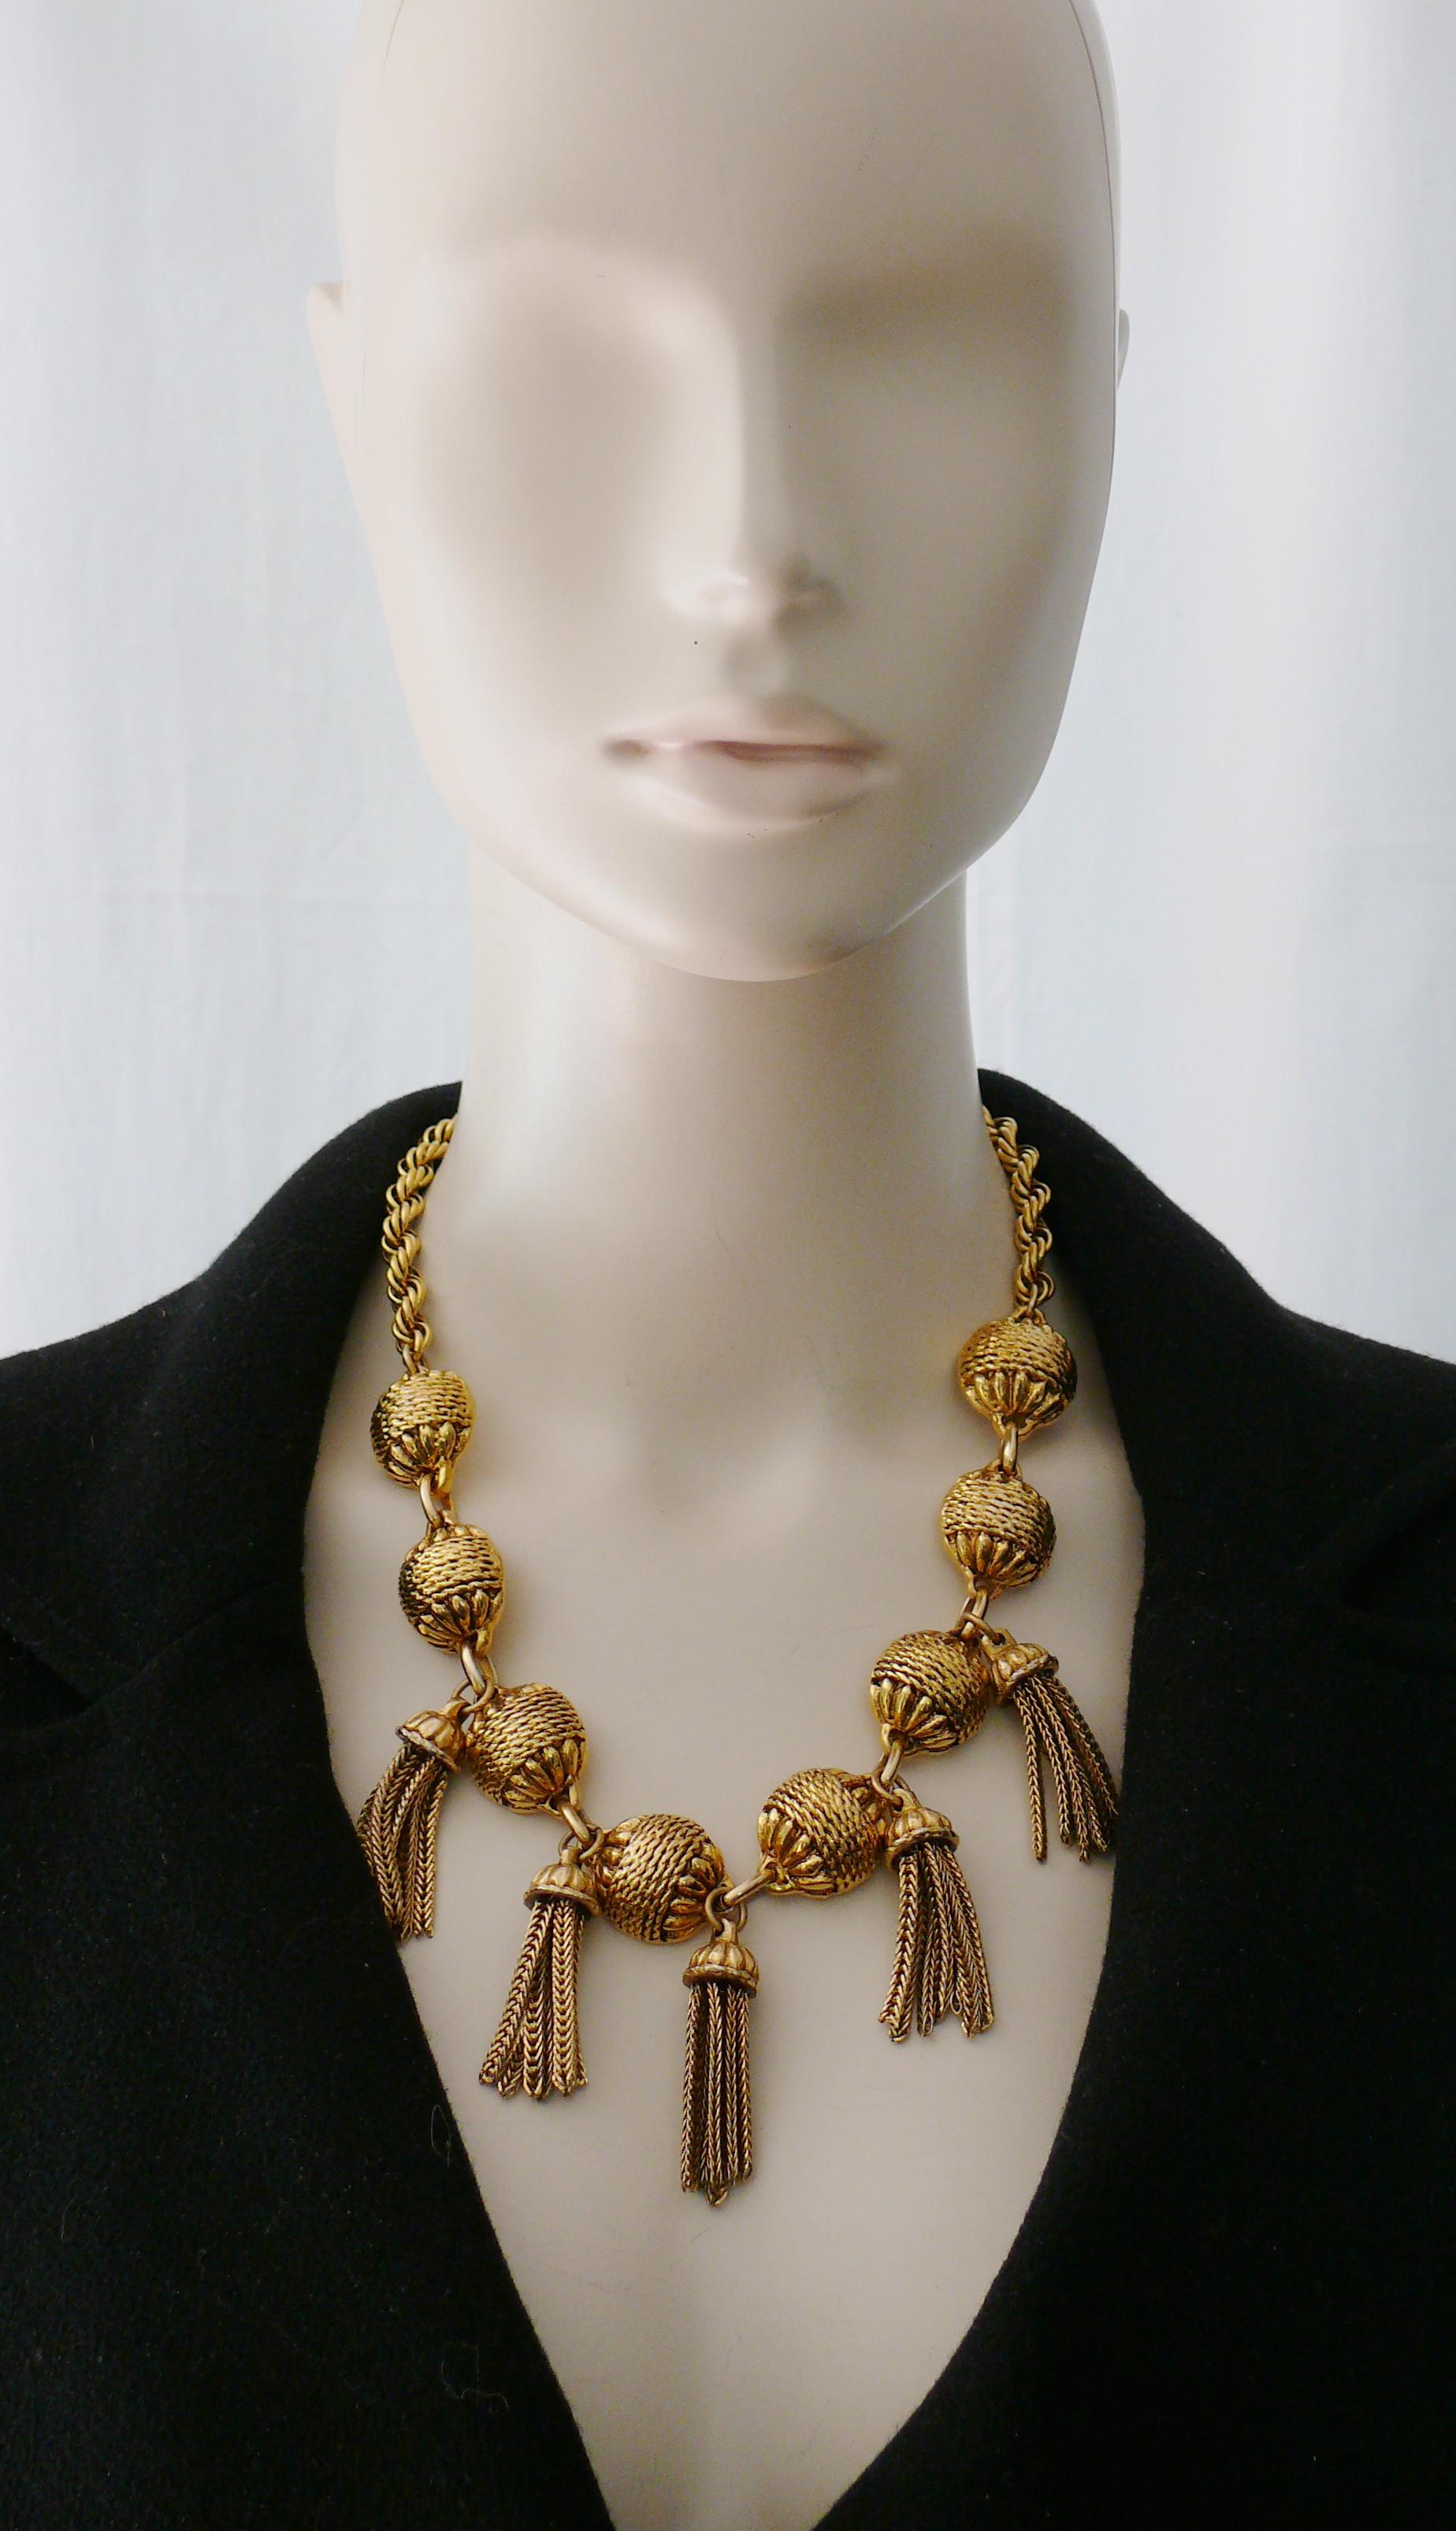 SATELLITE Paris vintage antiqued gold tone resin necklace and clip-on earrings embellished with chain tassels.

Embossed SATELLITE on the necklace t-bar closure and round links.
Matching earrings are unmarked.

NECKLACE indicative measurements :